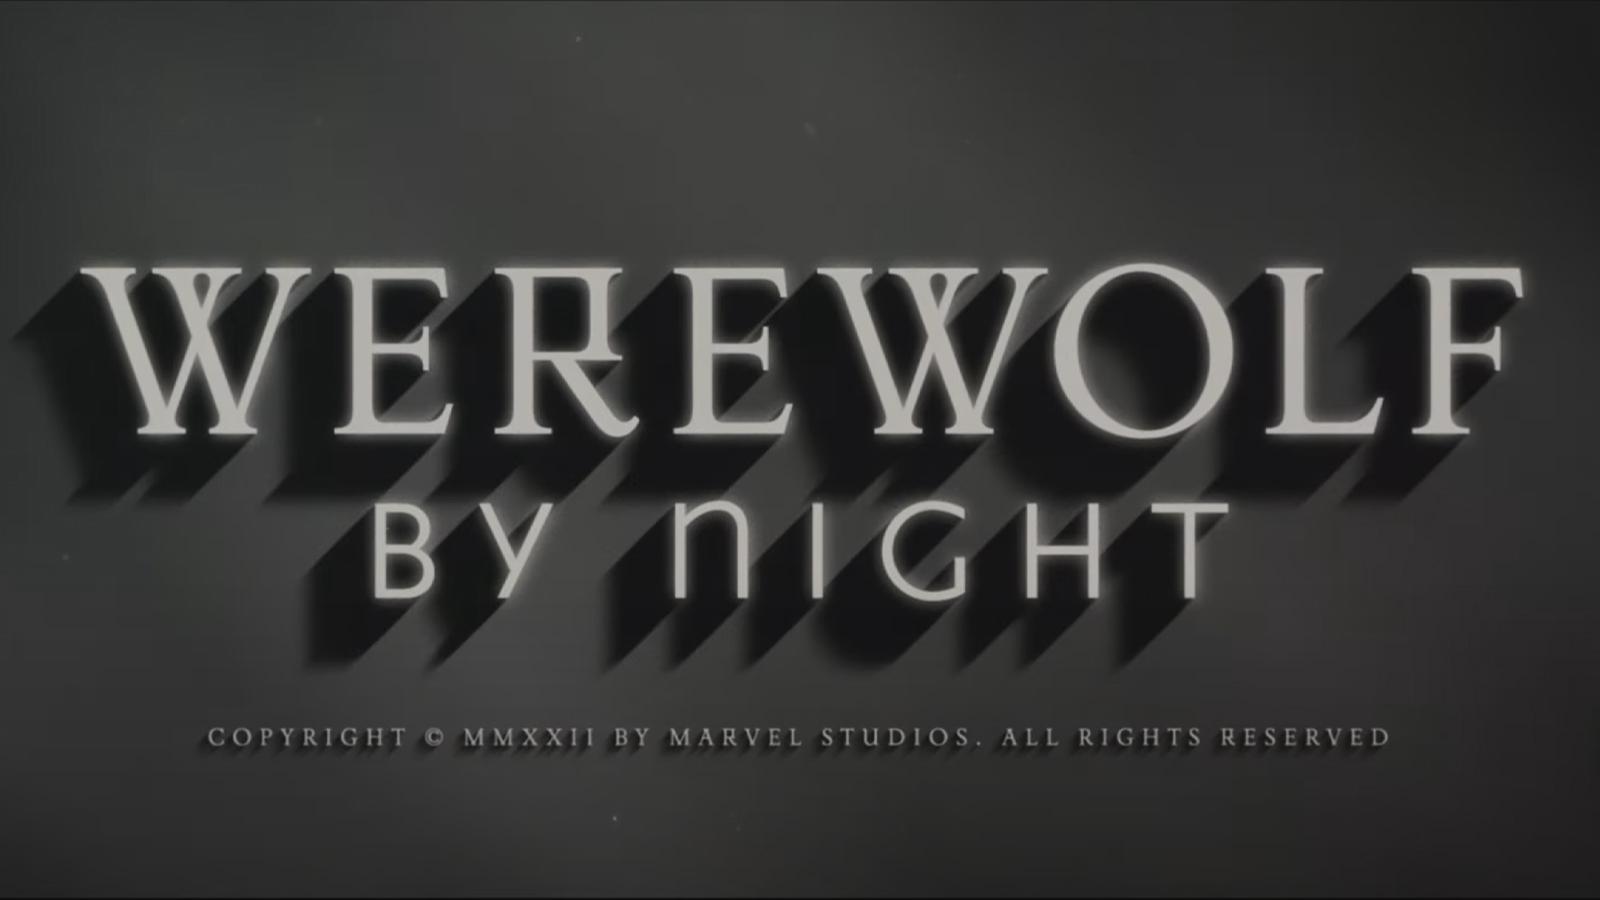 an image of marvel's werewolf by night